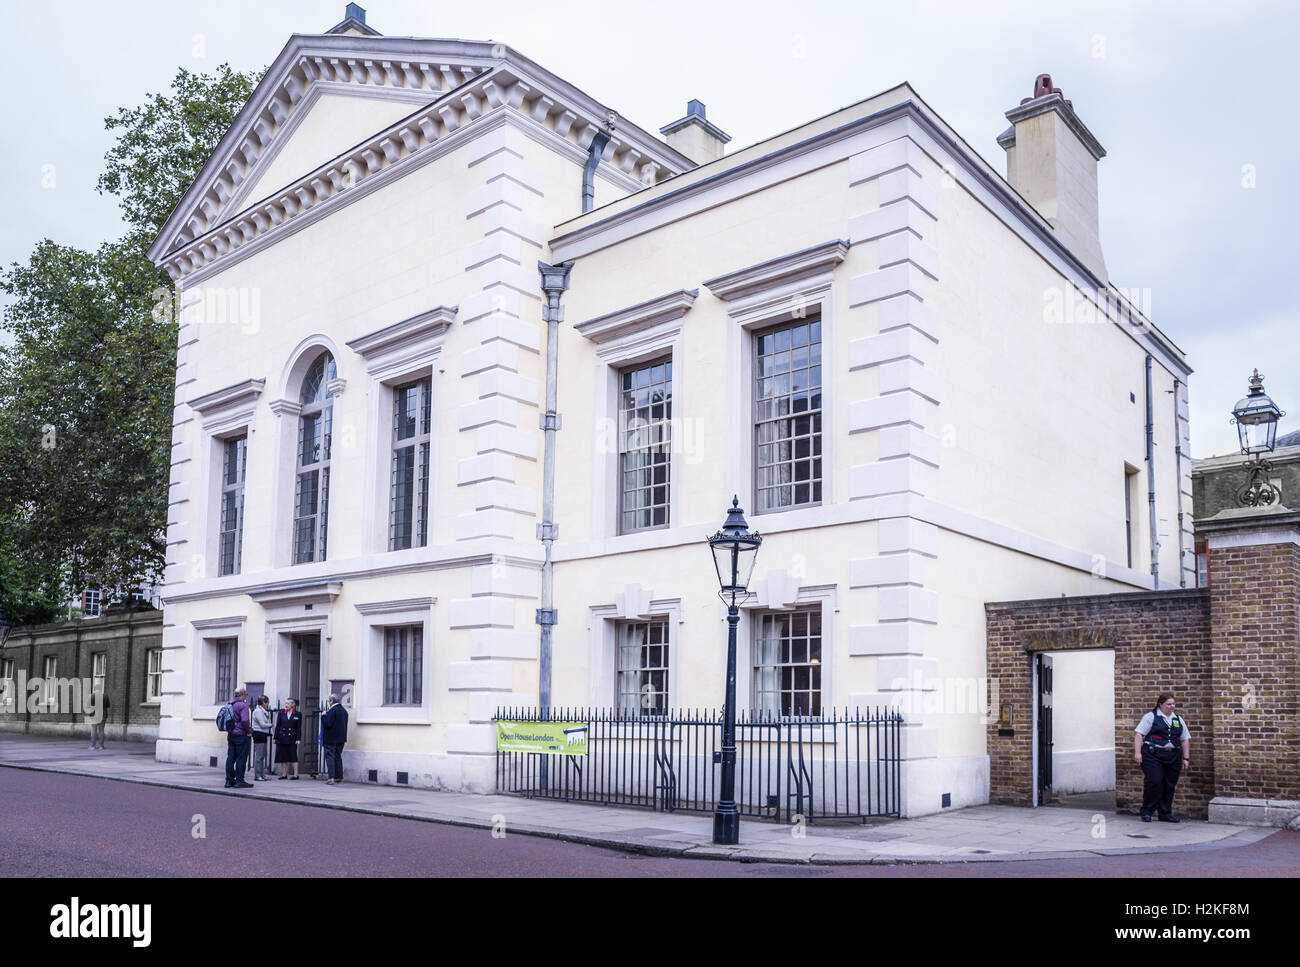 Queen's chapel, designed by Inigo Jones in the early seventeenth century, opposite St Jame's palace, London, England. Stock Photo